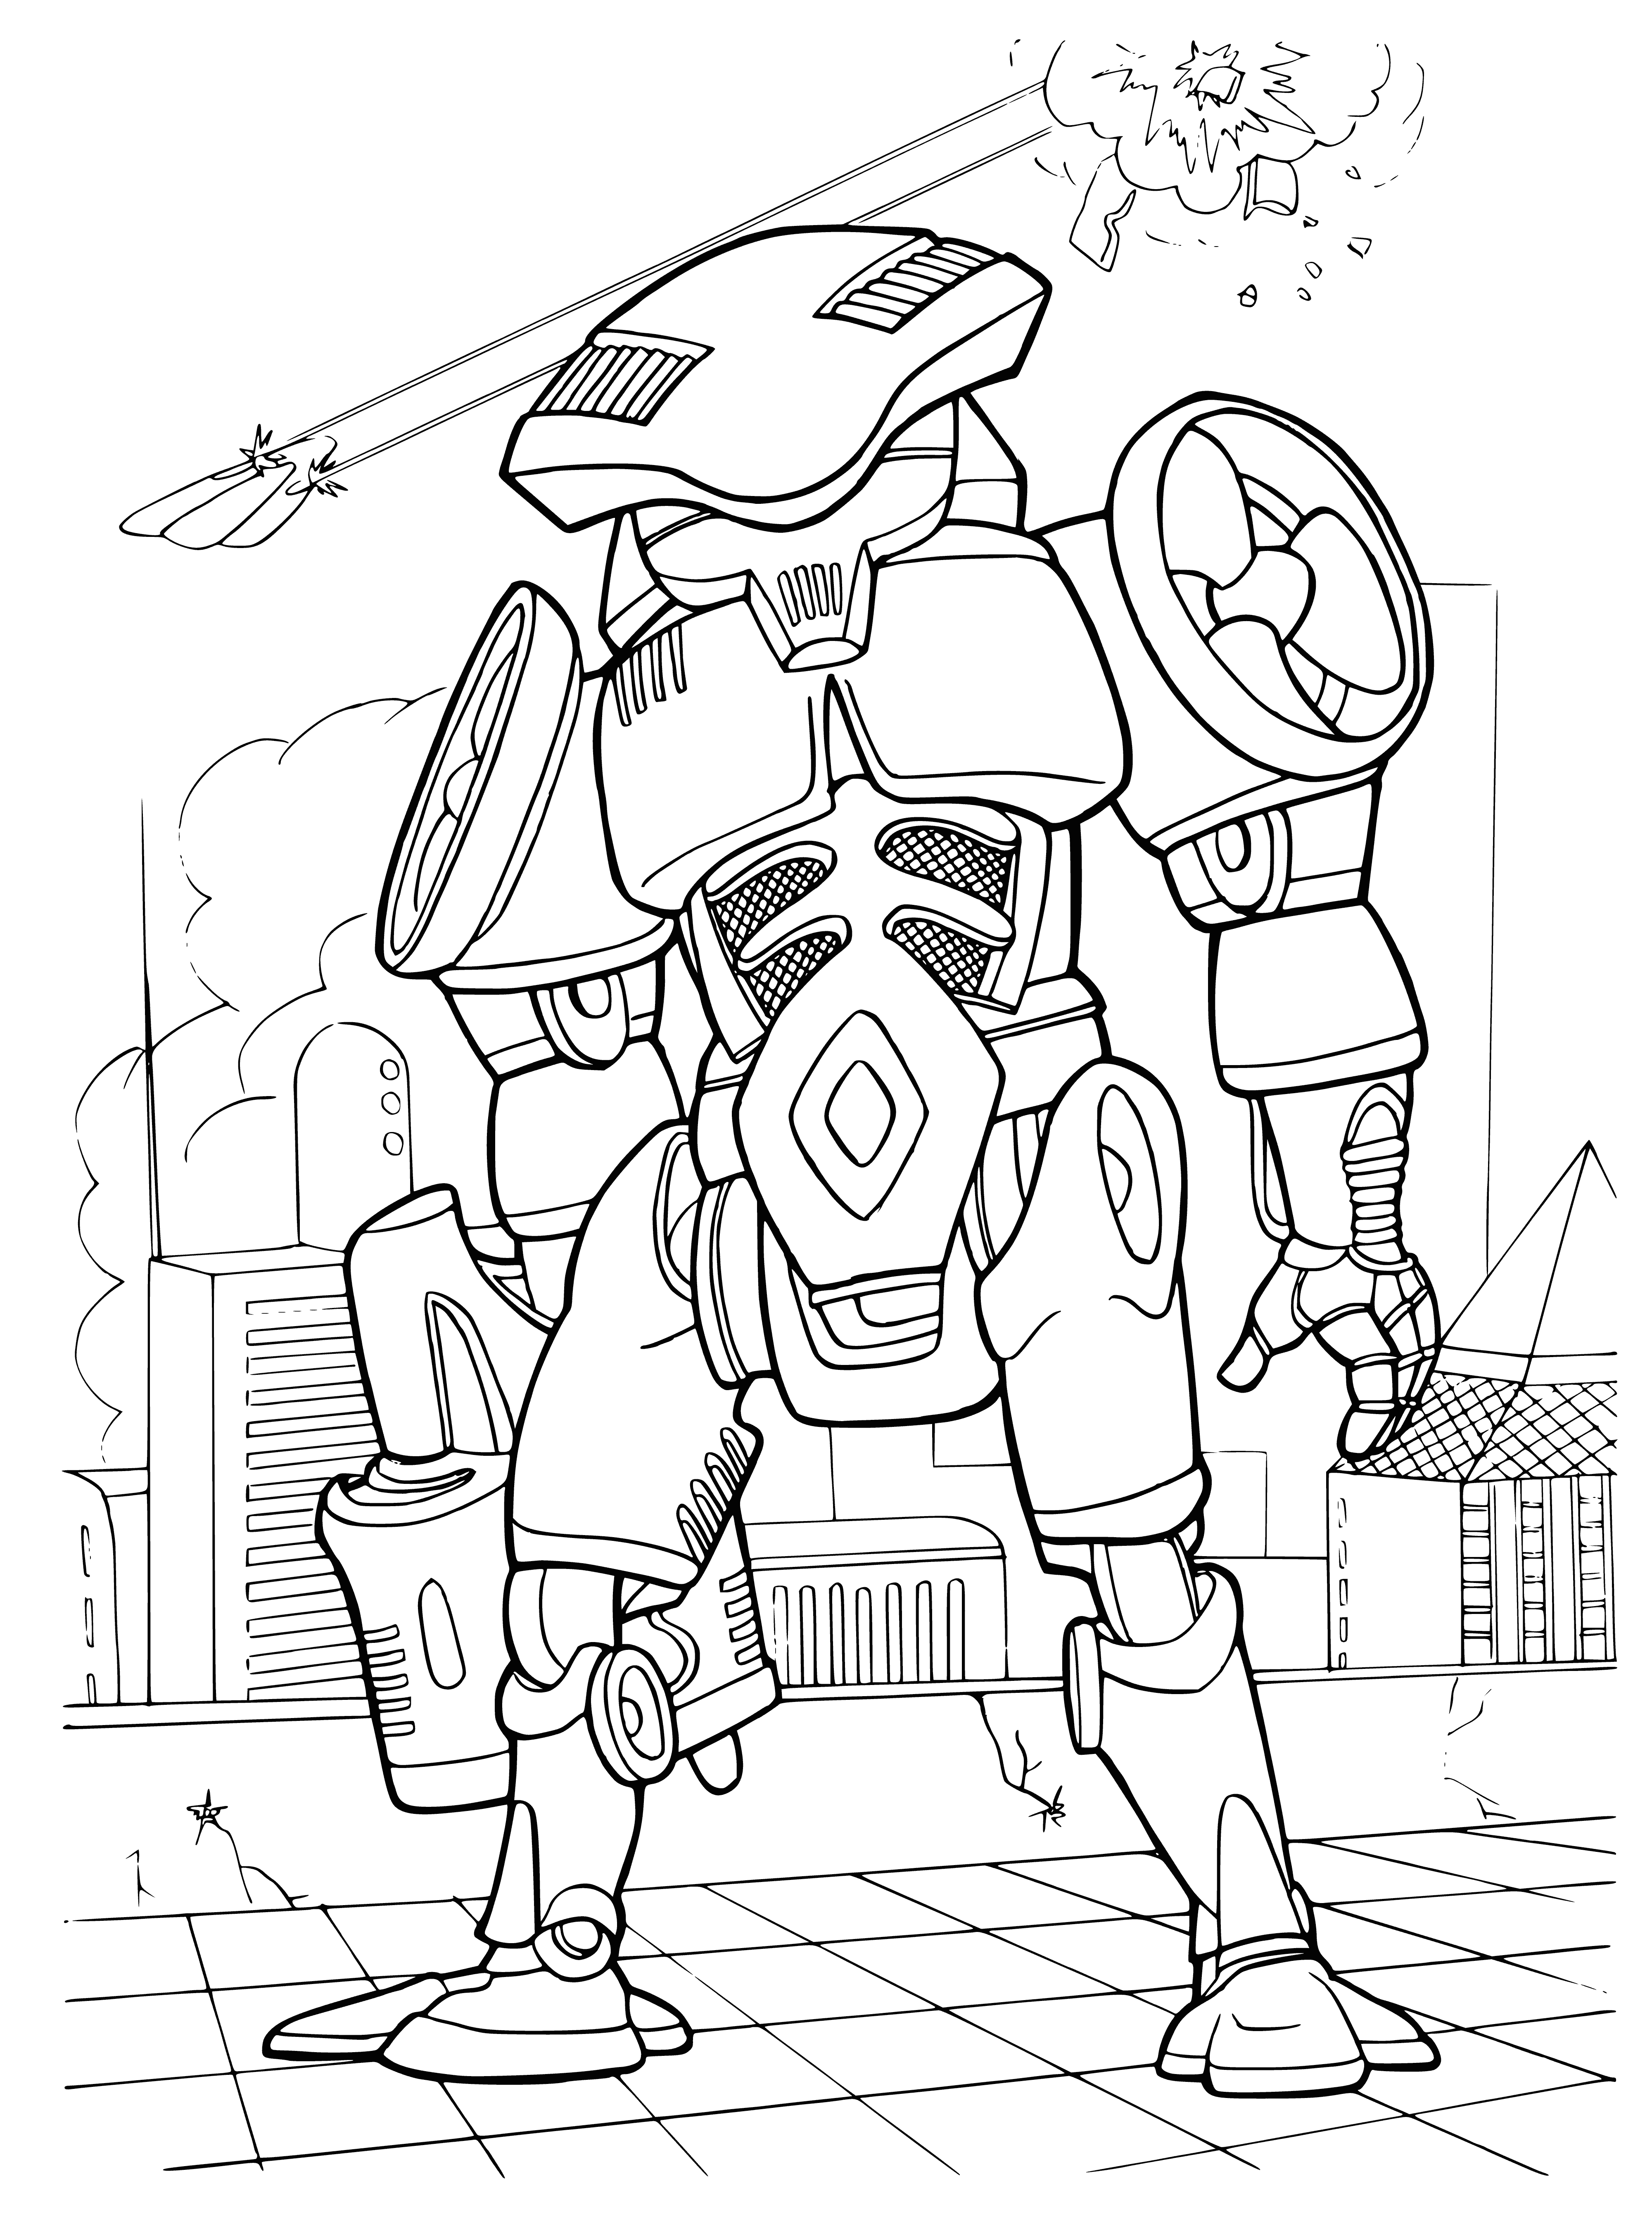 coloring page: Future wars fought by advanced cyborgs w/ near-invincible armor & weaponry capable of taking out armies alone.